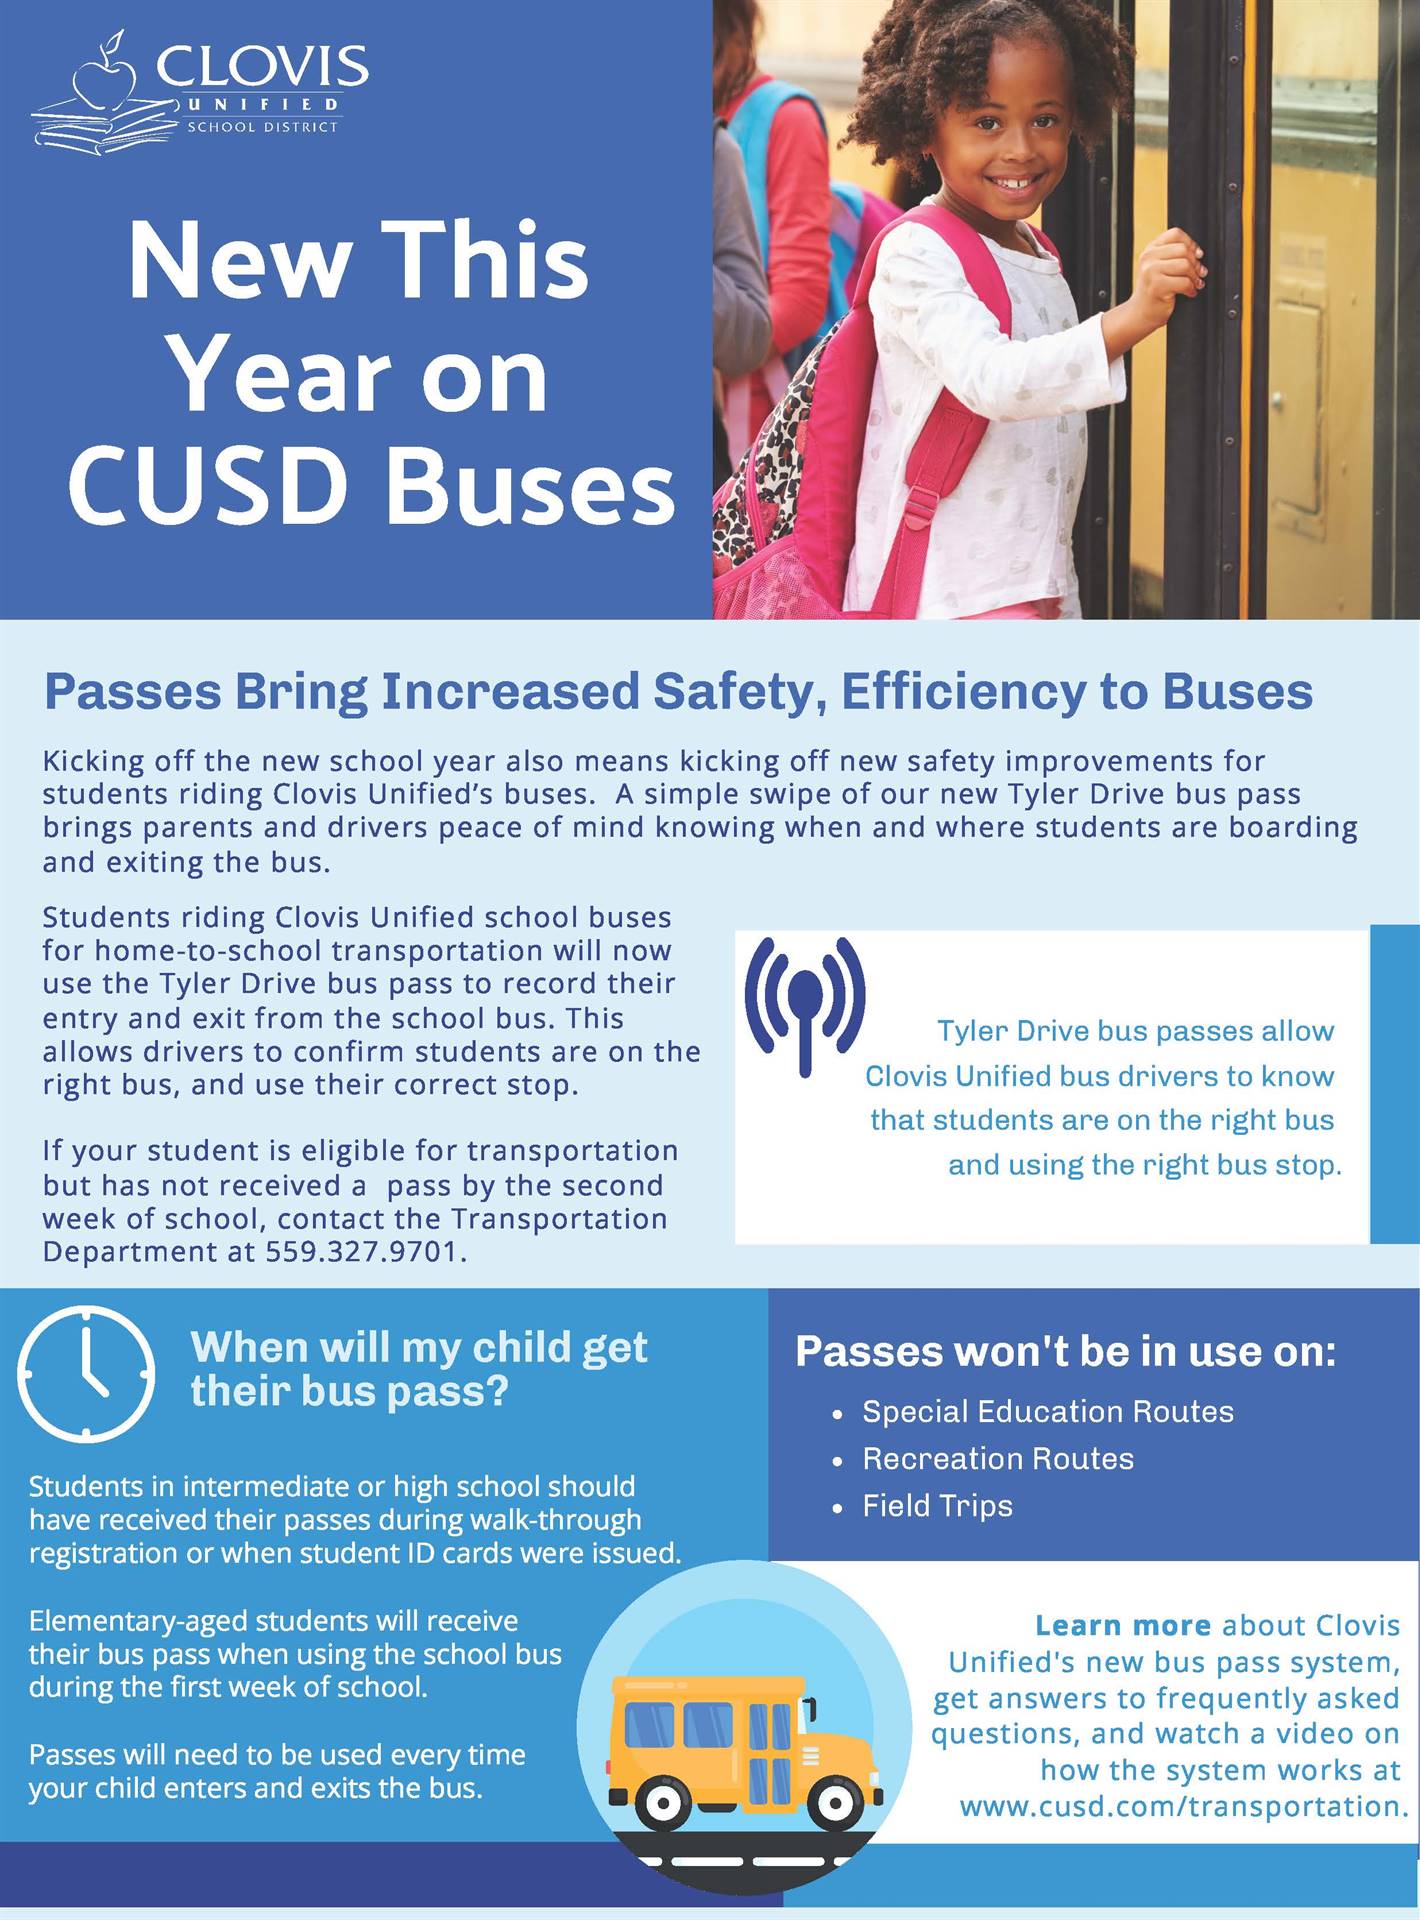 tyler bus pass infographic - full file downloadable below